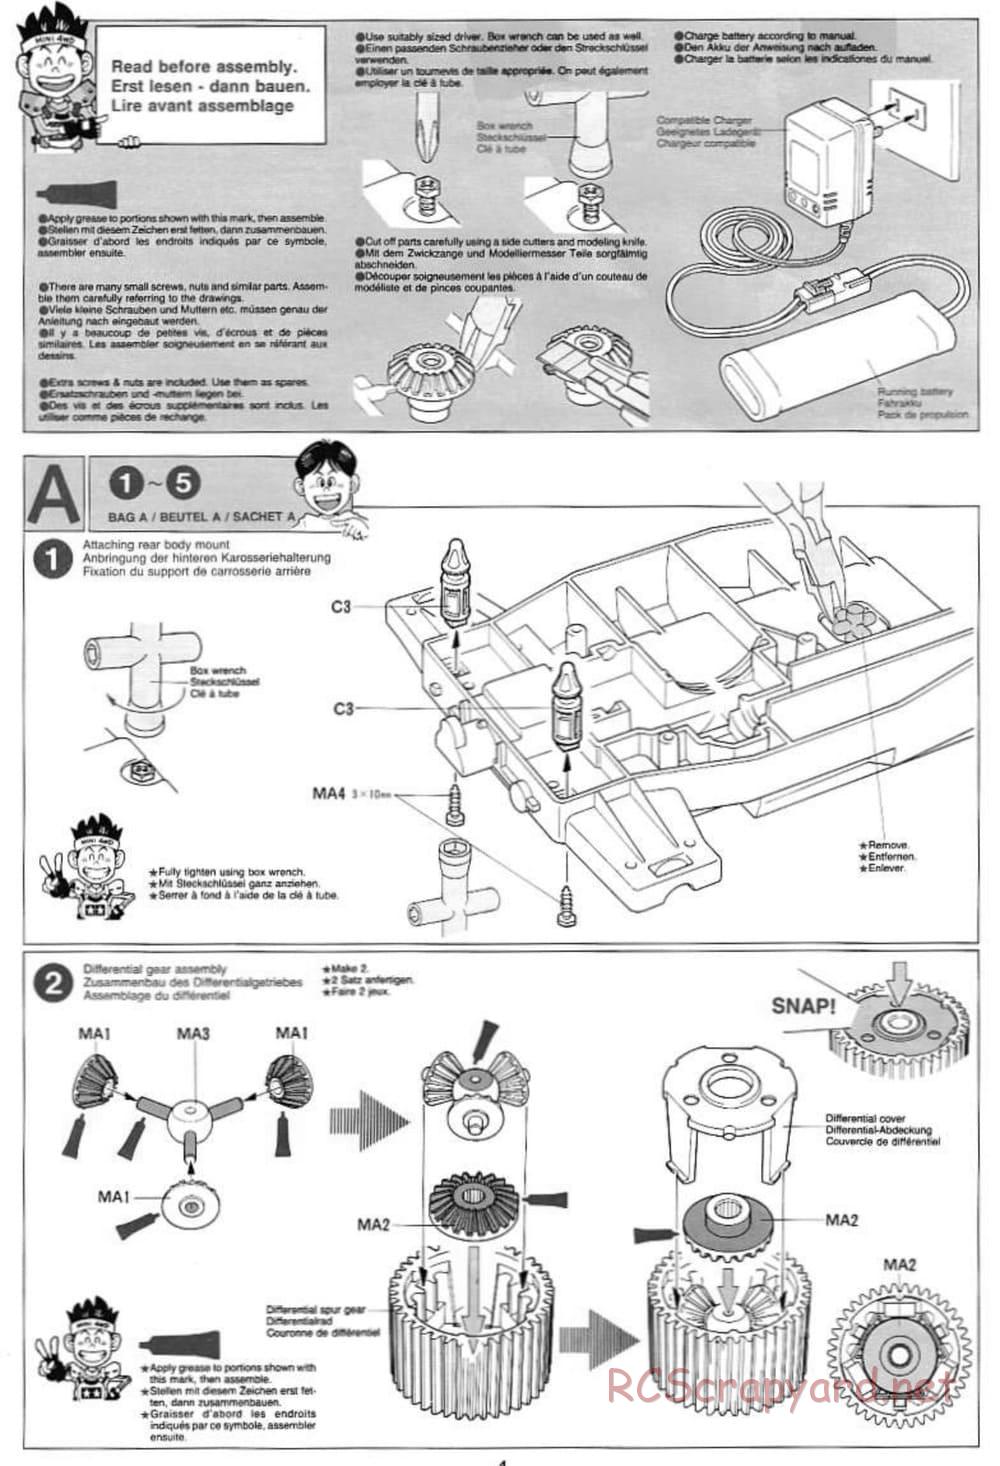 Tamiya - Voltec Fighter - Boy's 4WD Chassis - Manual - Page 4